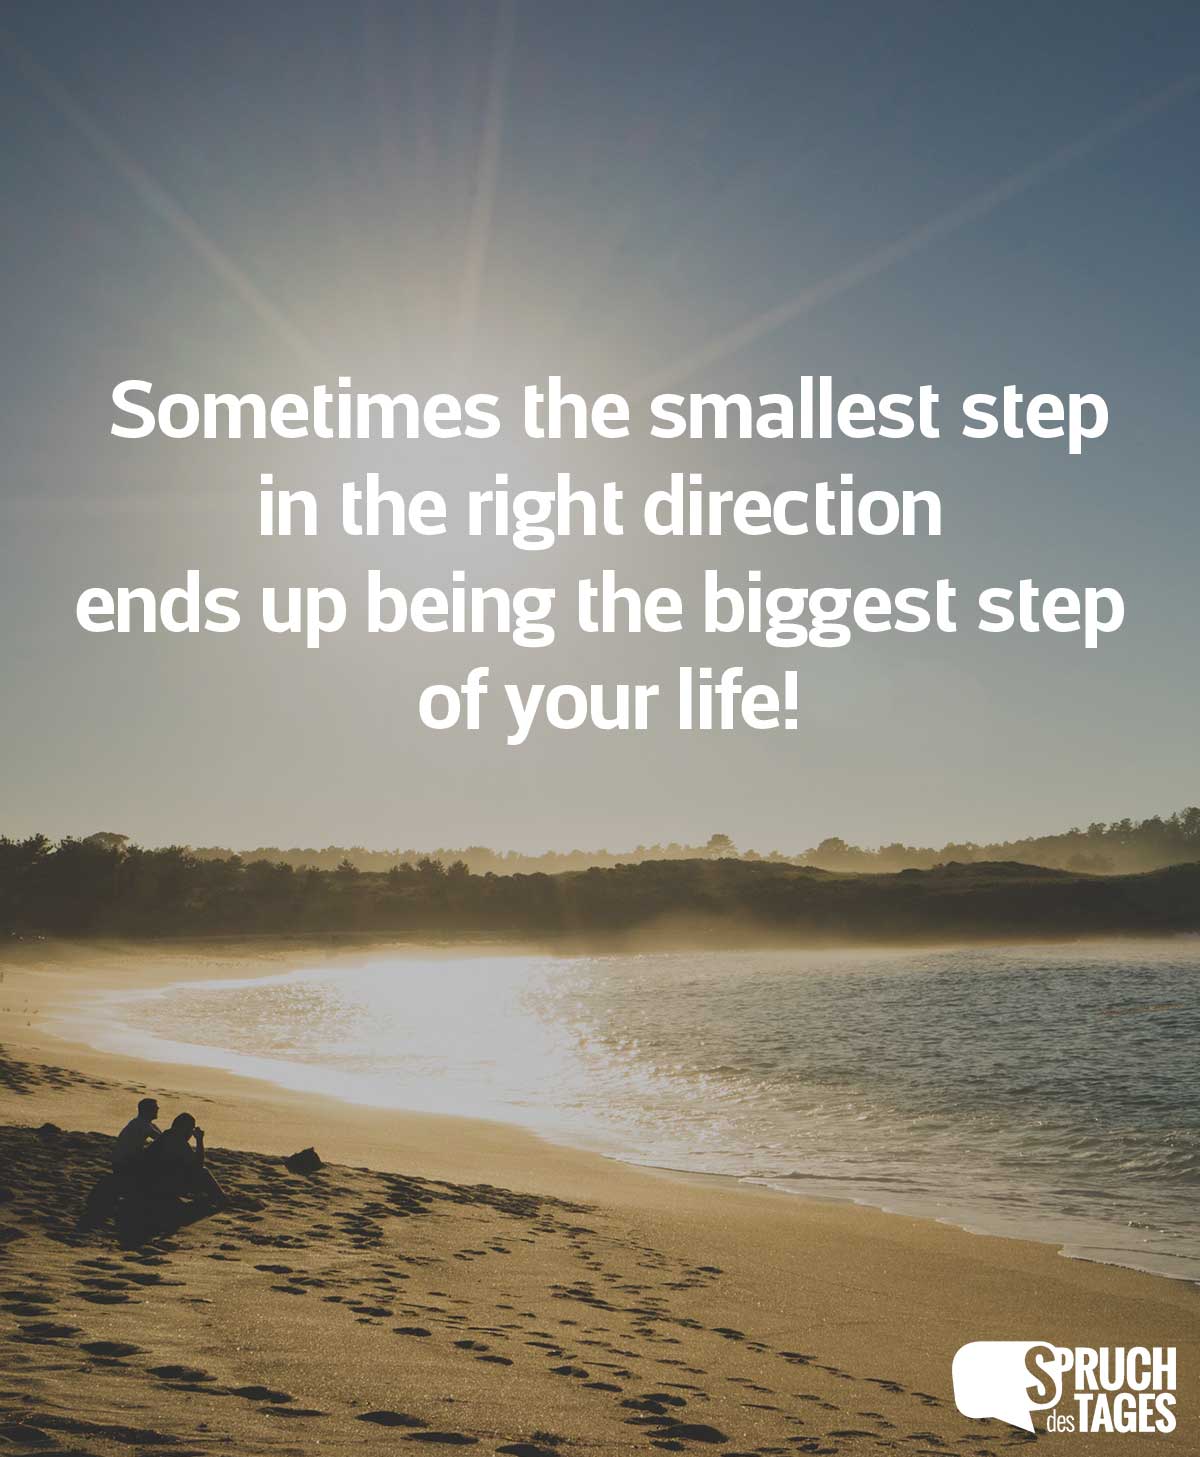 Sometimes the smallest step in the right direction ends up being the biggest step of your life!